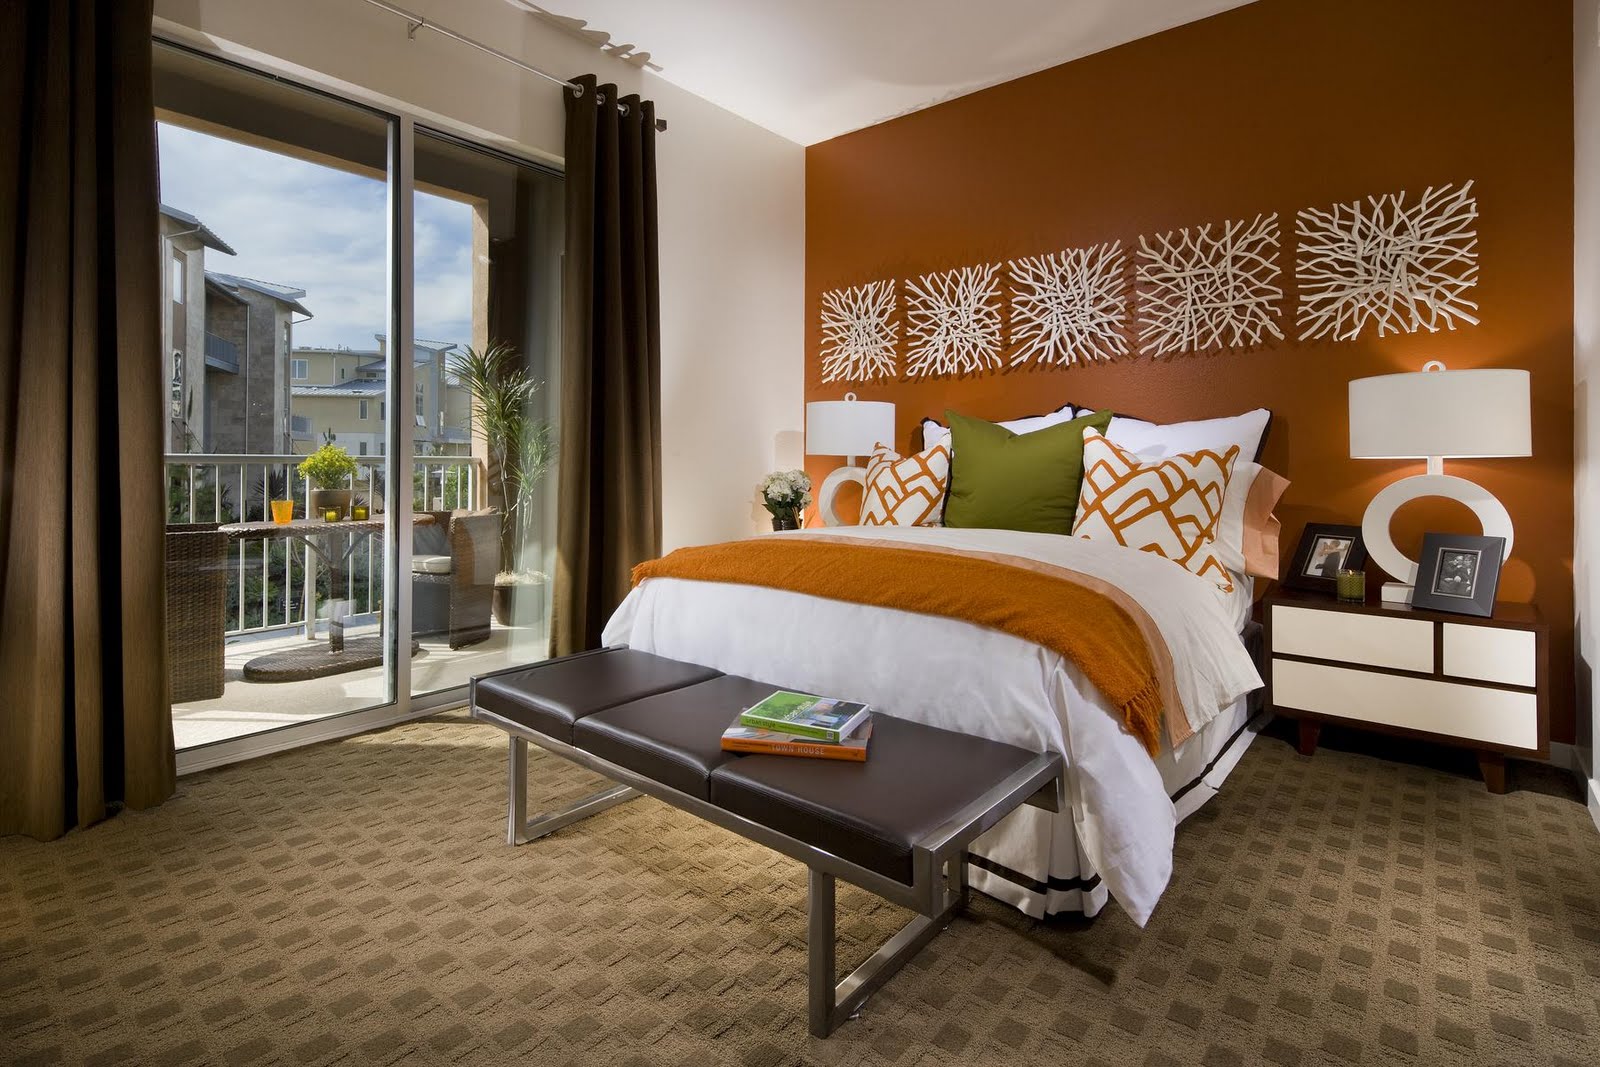 This Orange Bedroom Accent Wall Is A Bold Choice But Works With The